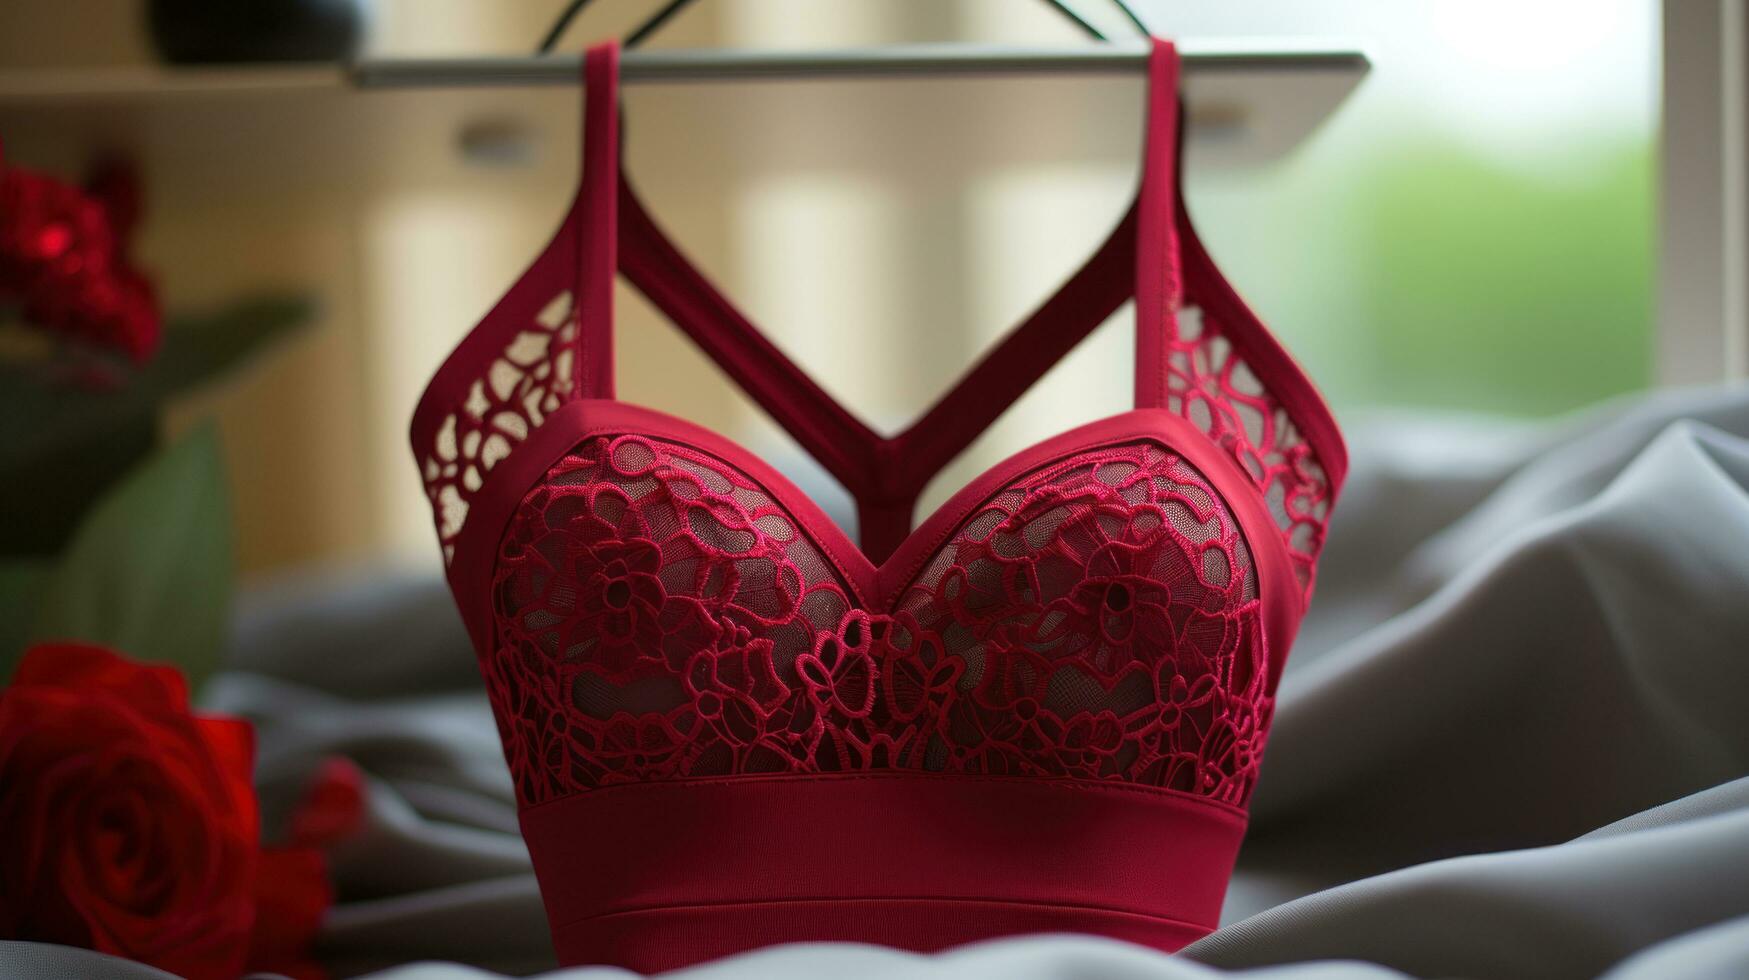 Beautiful red lingerie bra on a bed in the morning light. 32430487